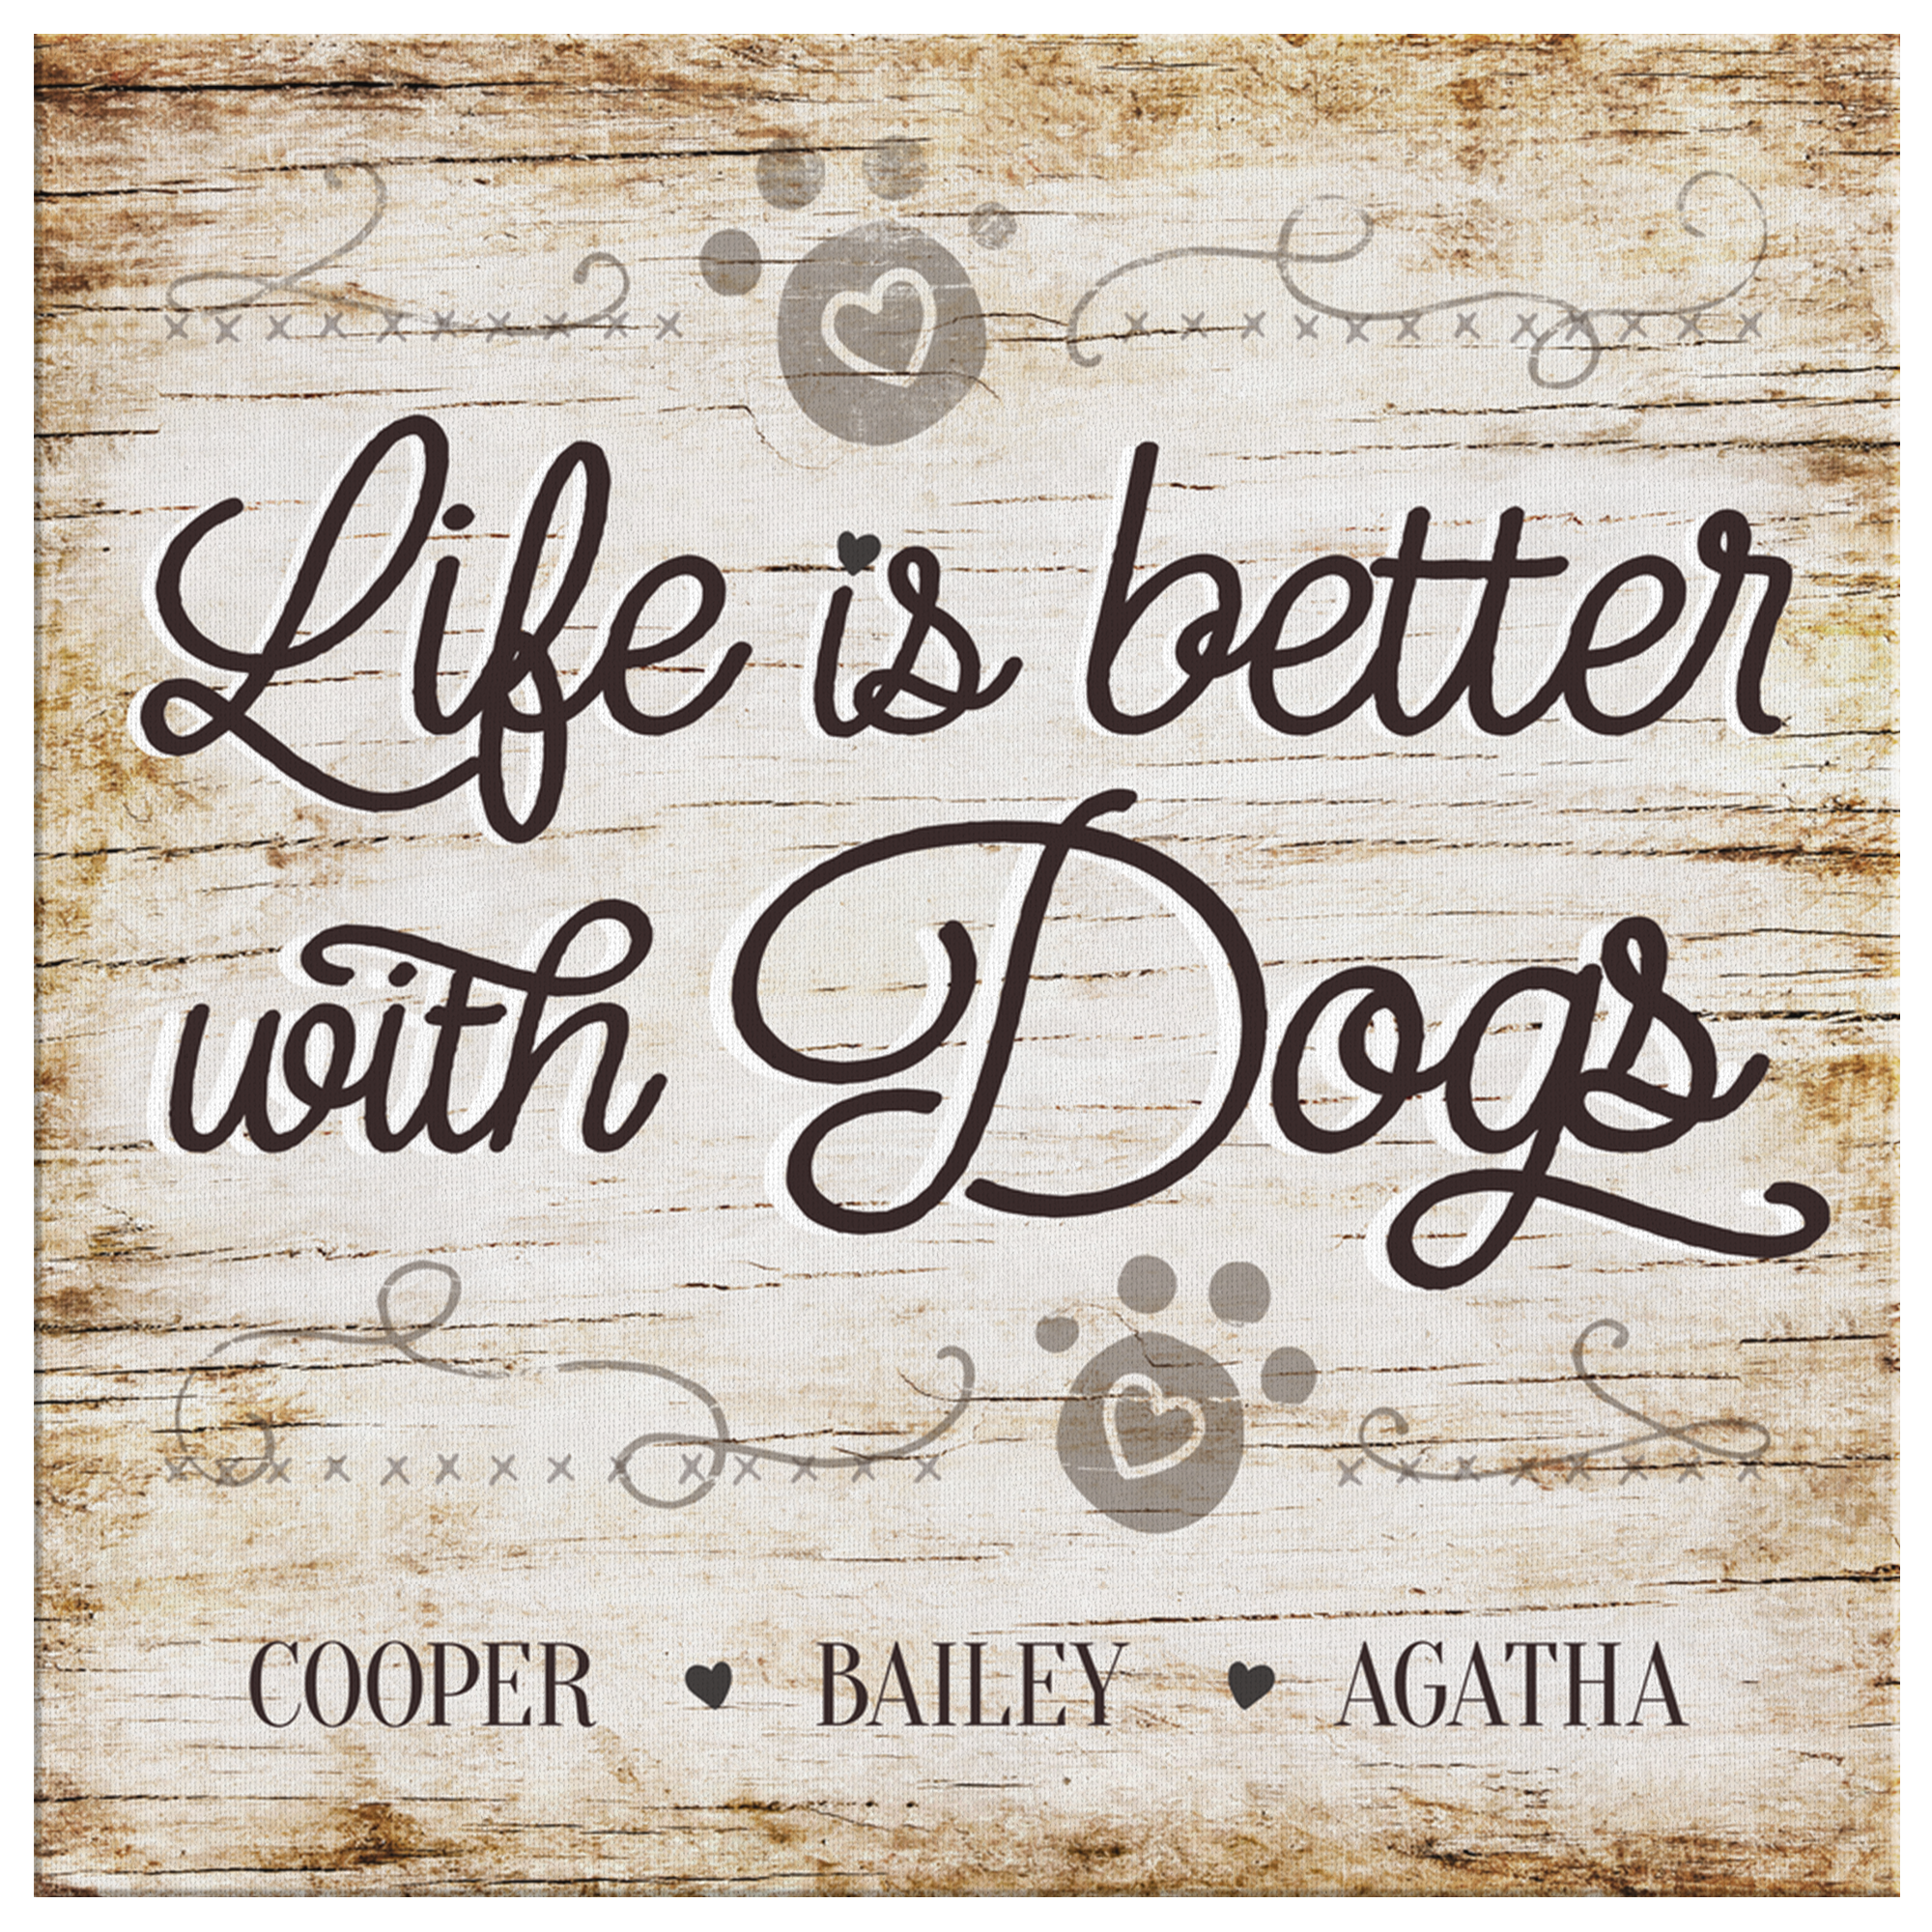 Personalized "Life Is Better With Dogs" Premium Canvas Wall Art